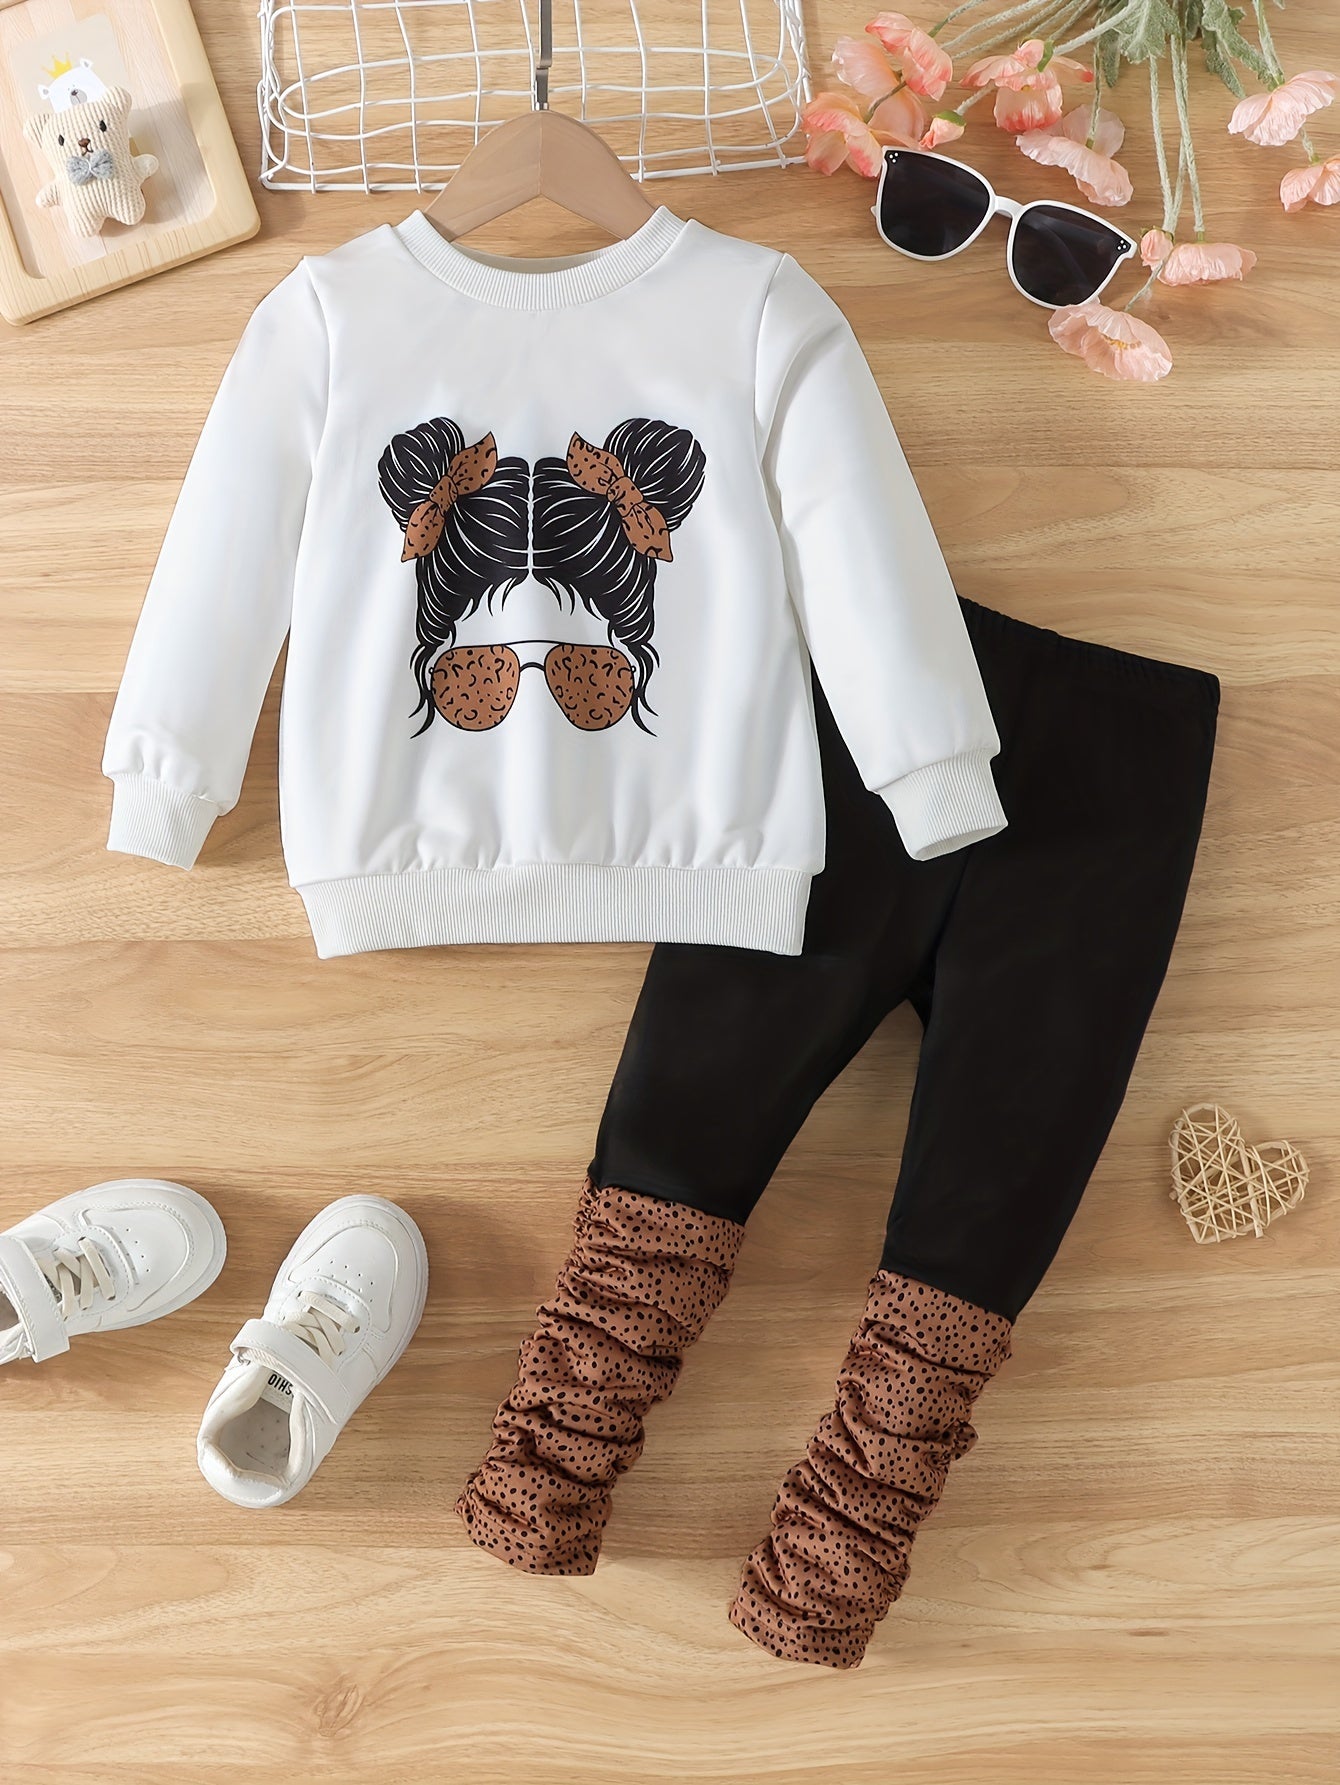 Girl's Floral Pattern Outfit 2pcs, Portrait Graphic Sweatshirt & Pants Set, Kid's Clothes For Spring Fall